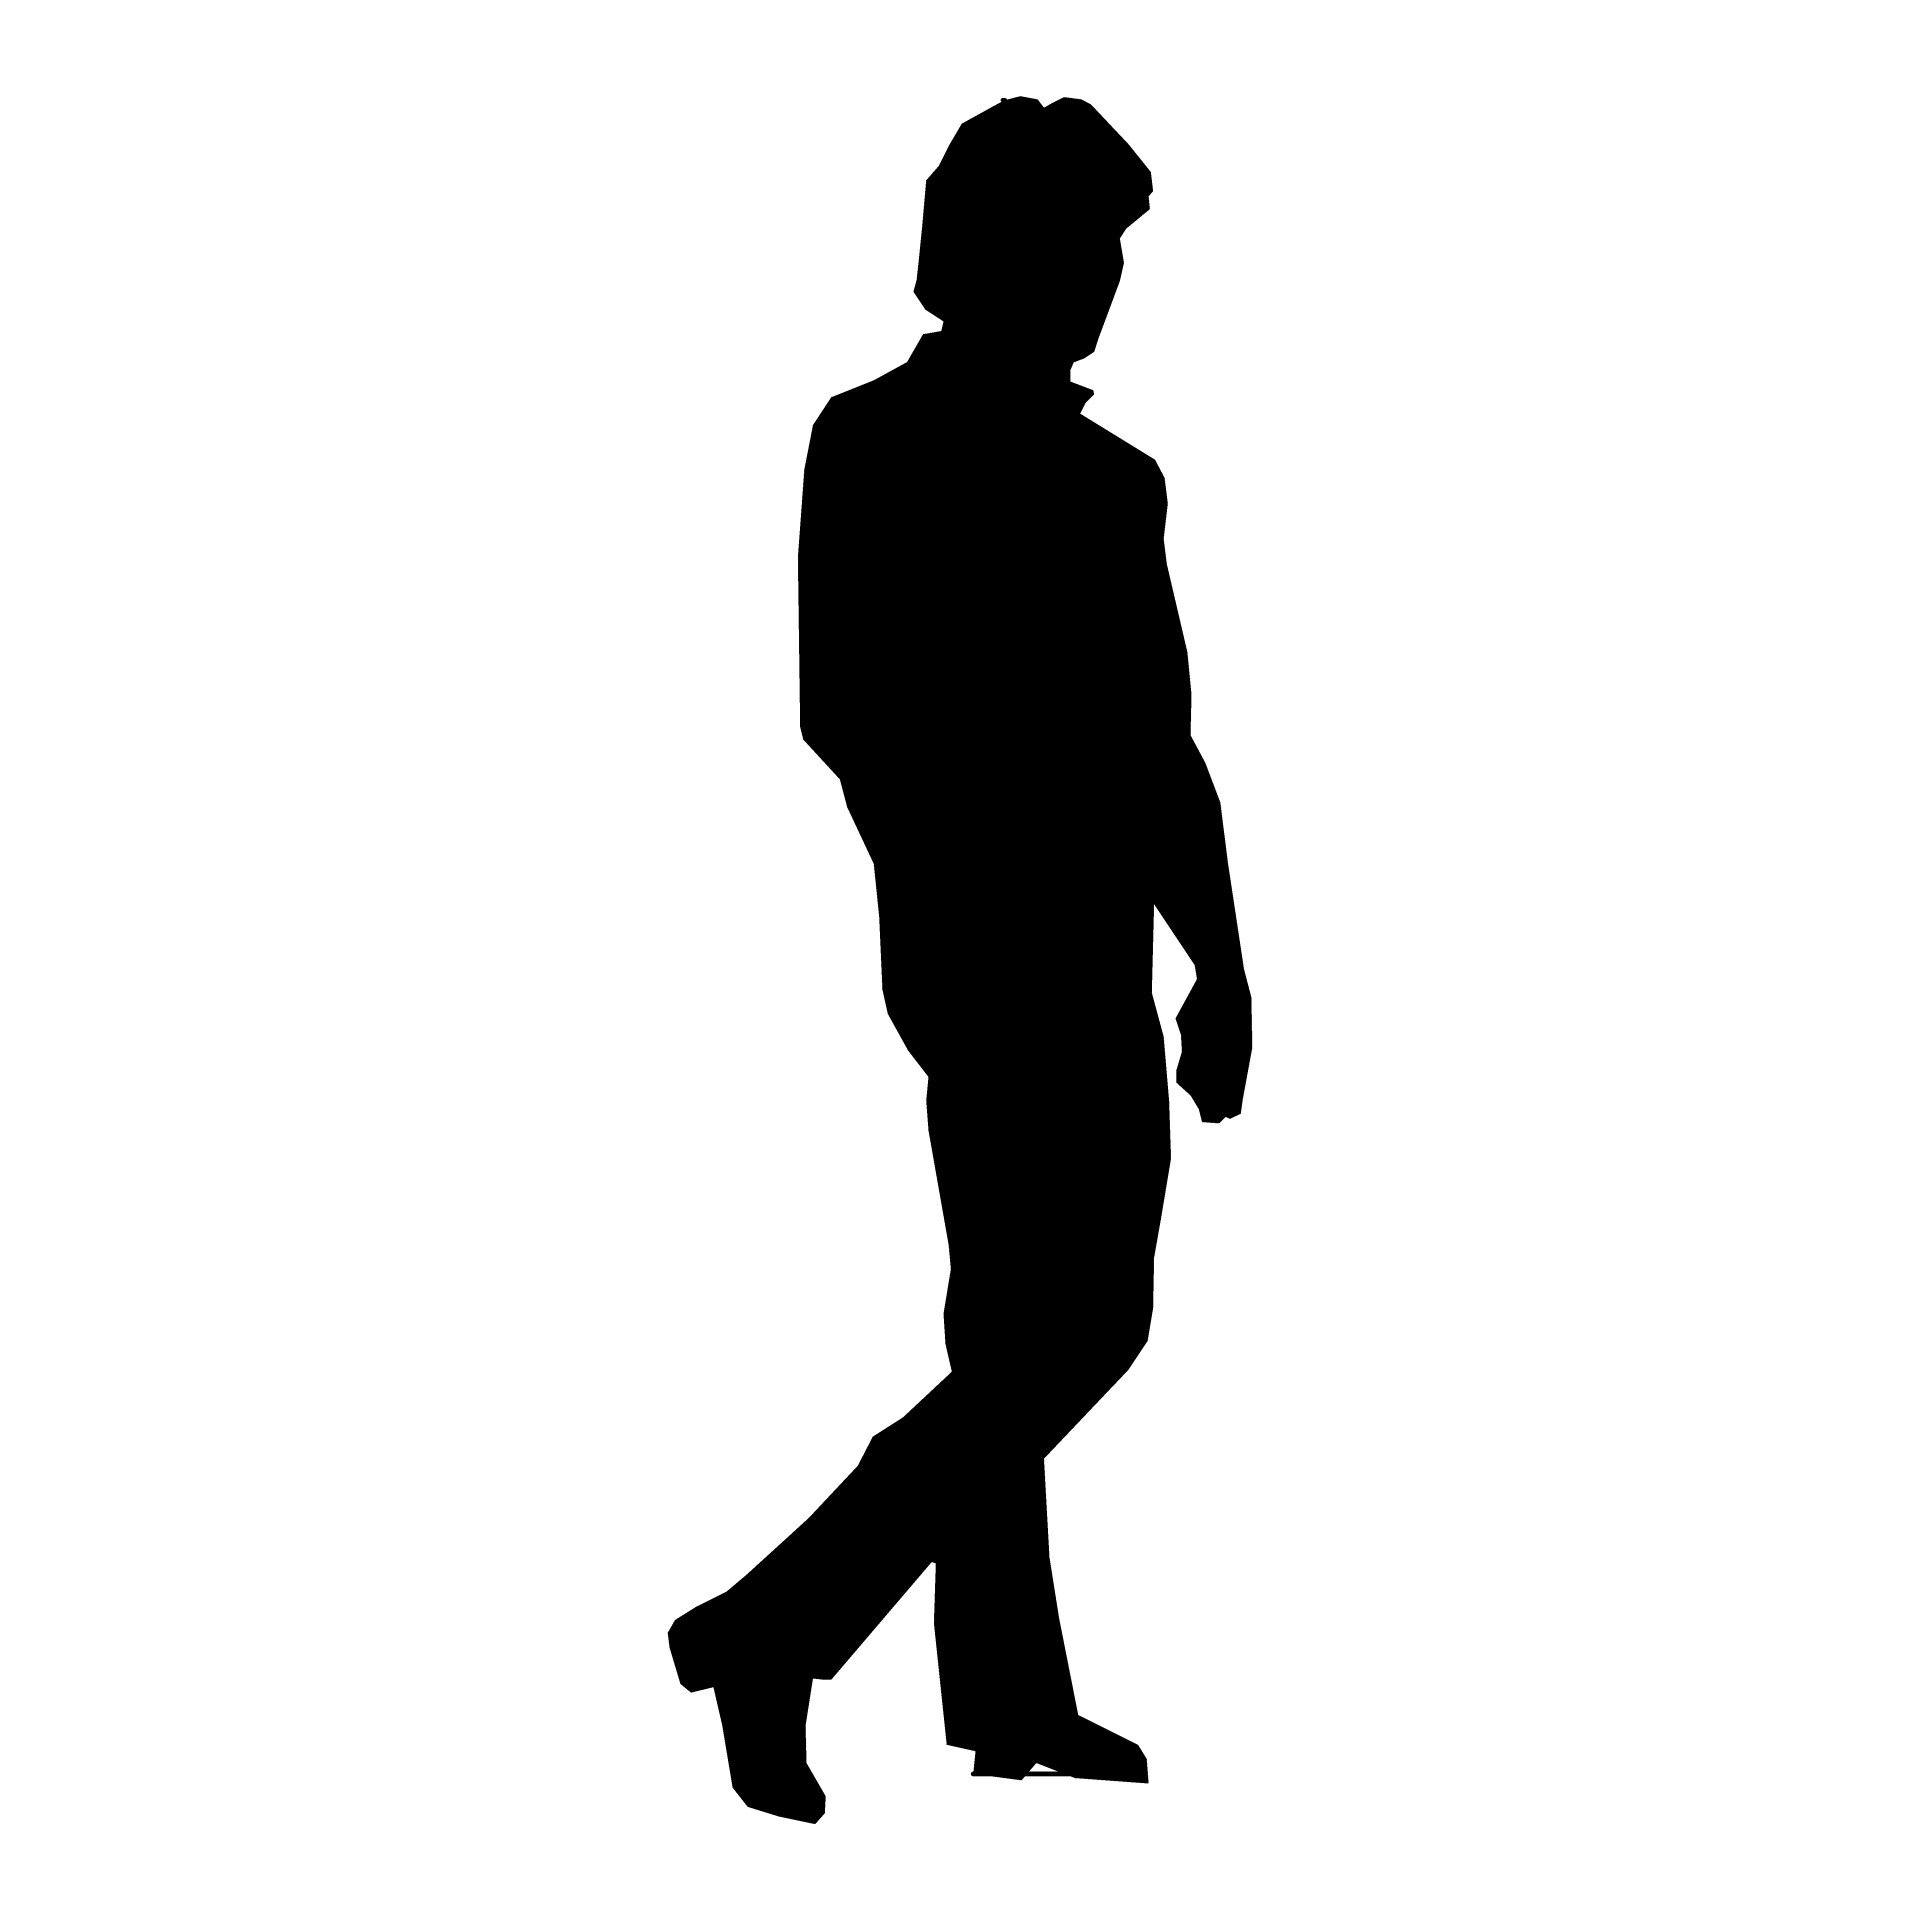 Silhouette of person walking on street photo